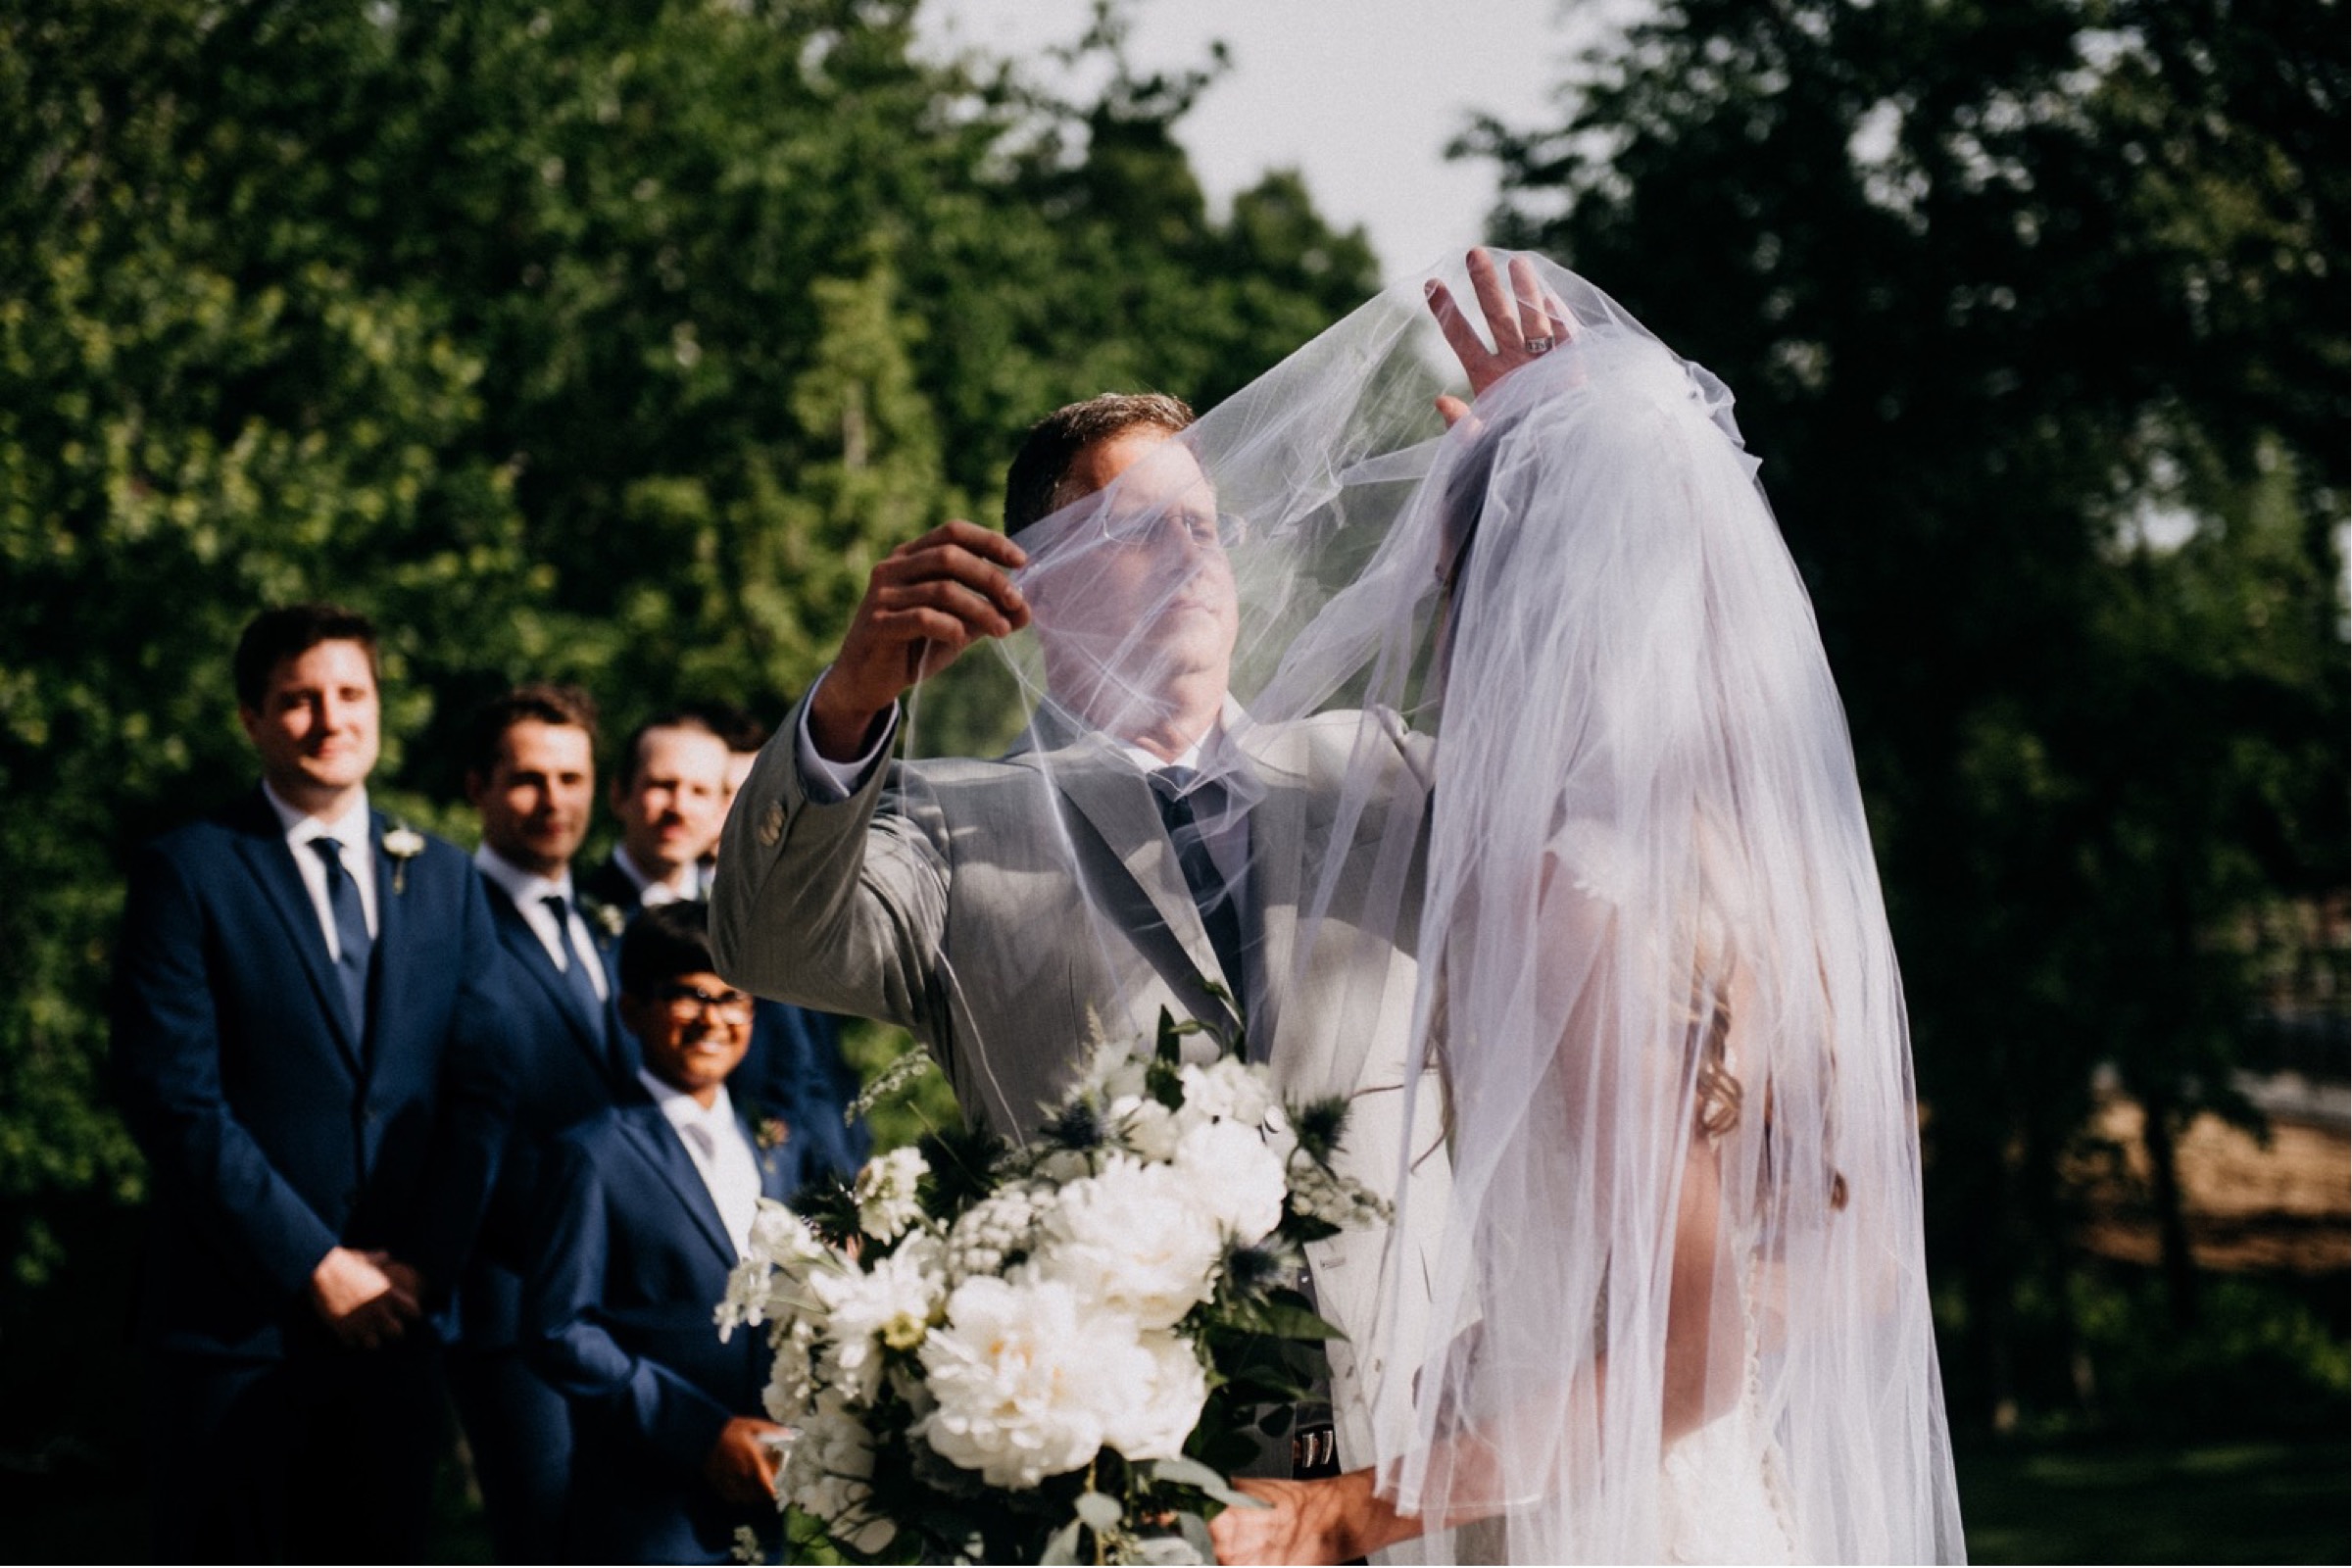 a dad is lifting the veil over his daughter's face during the ceremony portion of a wedding day timeline